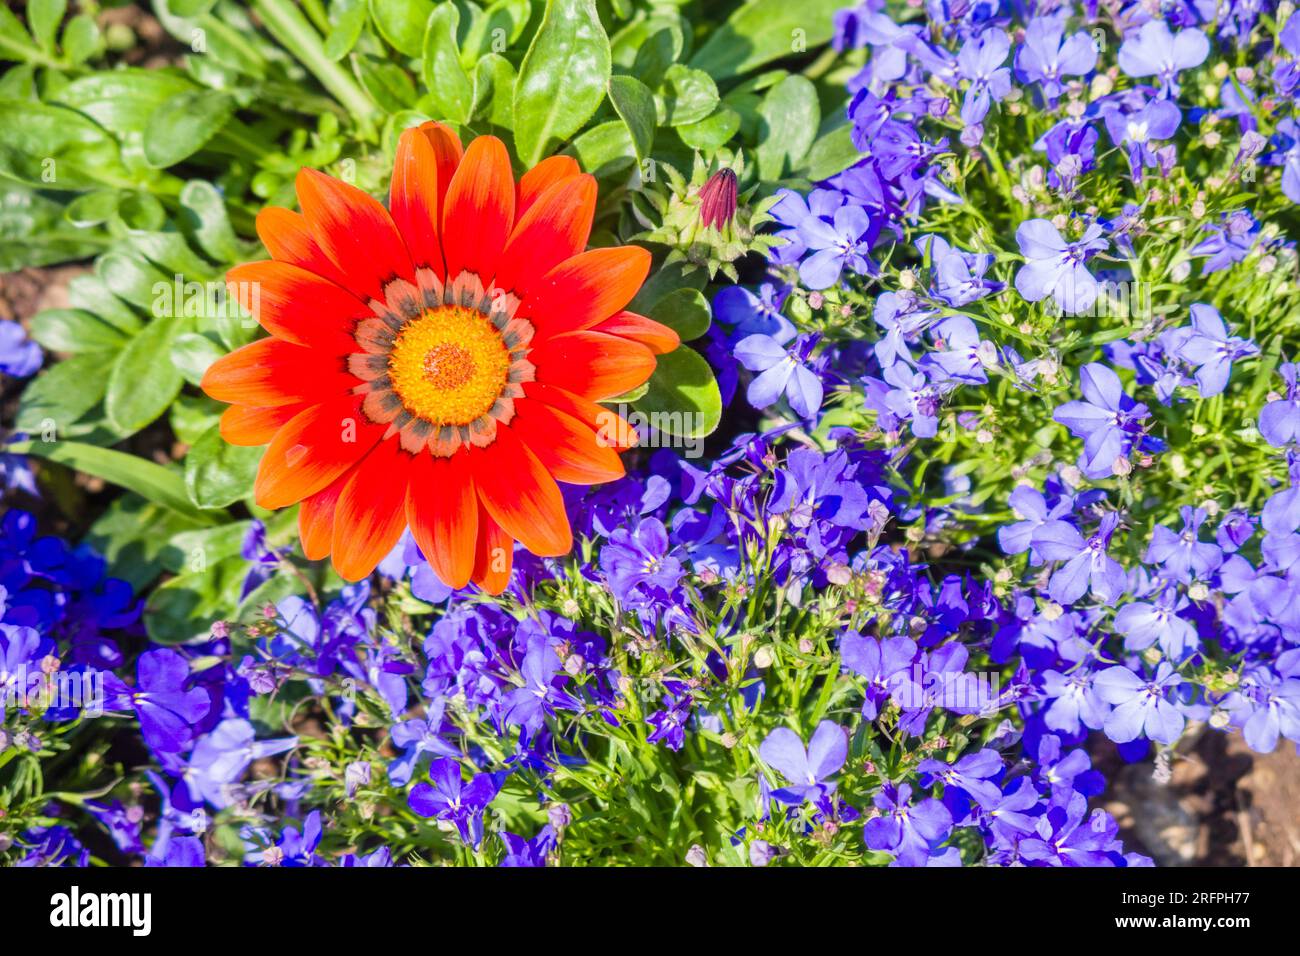 Red flower blooming within small blue flowers. Stock Photo